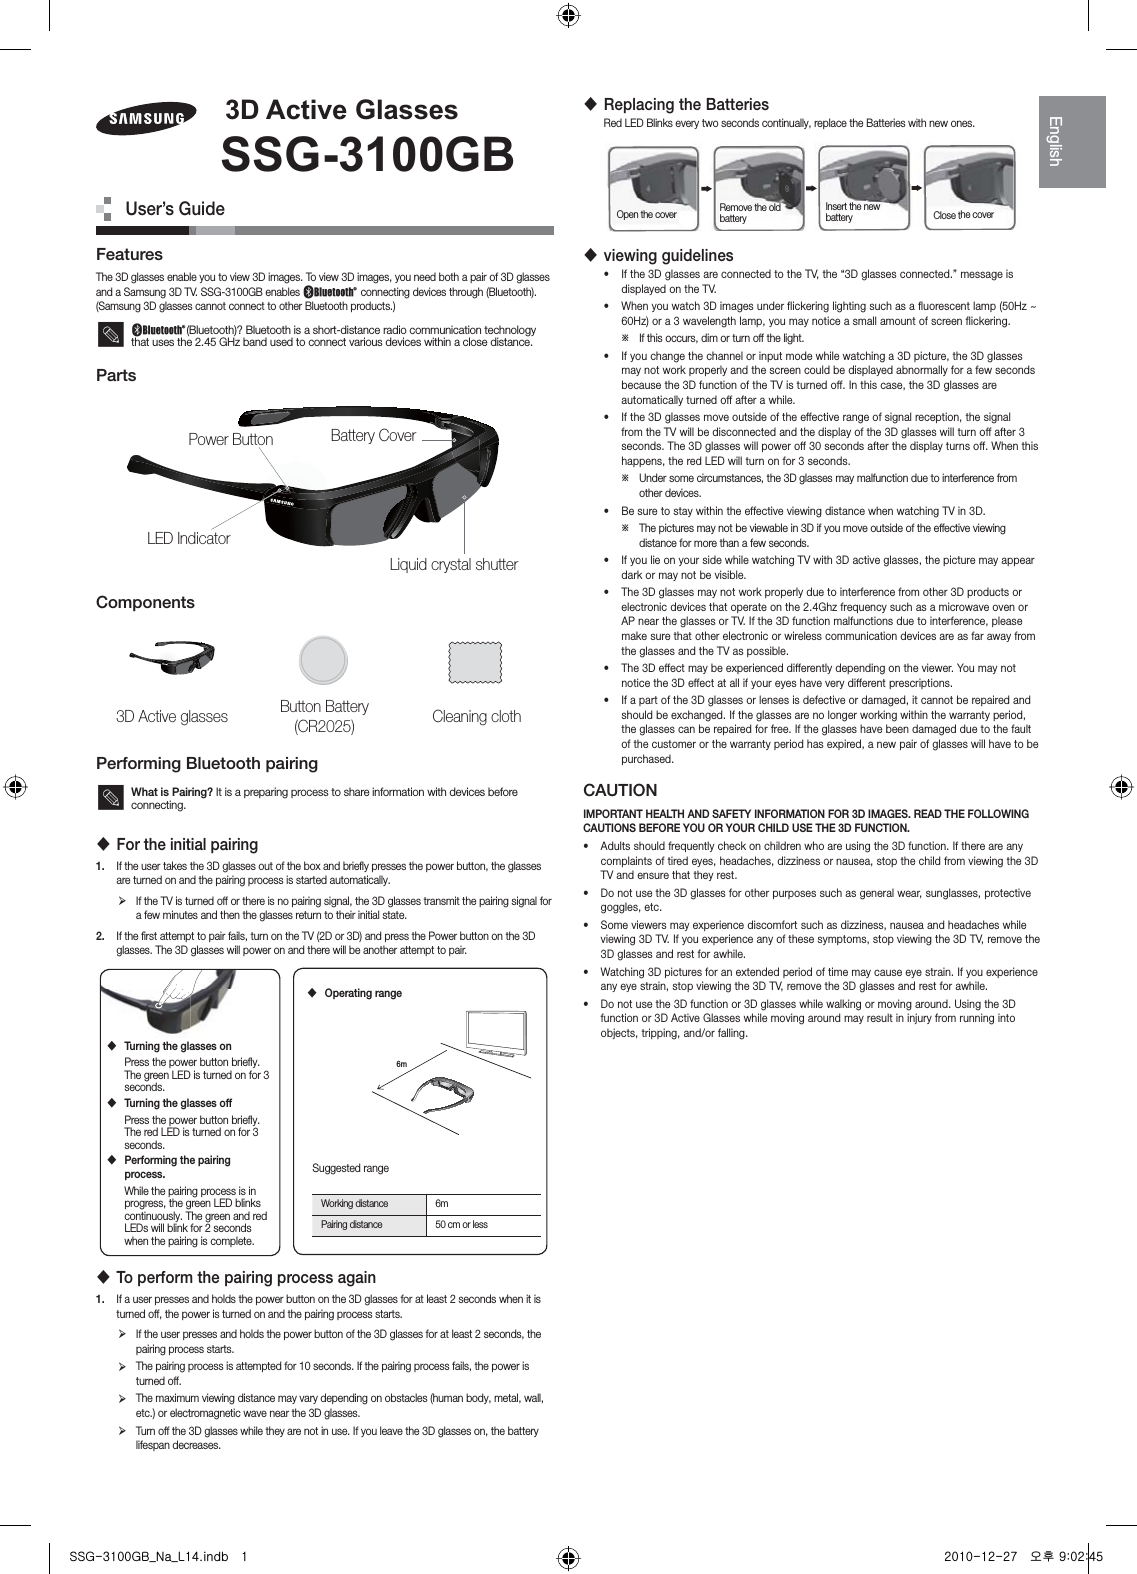 FeaturesThe 3D glasses enable you to view 3D images. To view 3D images, you need both a pair of 3D glasses and a Samsung 3D TV. SSG-3100GB enables  connecting devices through (Bluetooth). (Samsung 3D glasses cannot connect to other Bluetooth products.) (Bluetooth)? Bluetooth is a short-distance radio communication technology that uses the 2.45 GHz band used to connect various devices within a close distance.PartsComponents3D Active glasses Button Battery (CR2025) Cleaning clothPerforming Bluetooth pairingWhat is Pairing? It is a preparing process to share information with devices before connecting. For the initial pairing1.  If the user takes the 3D glasses out of the box and brieﬂy presses the power button, the glasses are turned on and the pairing process is started automatically. ¾If the TV is turned off or there is no pairing signal, the 3D glasses transmit the pairing signal for a few minutes and then the glasses return to their initial state.2.  If the ﬁrst attempt to pair fails, turn on the TV (2D or 3D) and press the Power button on the 3D glasses. The 3D glasses will power on and there will be another attempt to pair. To perform the pairing process again1.  If a user presses and holds the power button on the 3D glasses for at least 2 seconds when it is turned off, the power is turned on and the pairing process starts. ¾If the user presses and holds the power button of the 3D glasses for at least 2 seconds, the pairing process starts. ¾The pairing process is attempted for 10 seconds. If the pairing process fails, the power is turned off. ¾The maximum viewing distance may vary depending on obstacles (human body, metal, wall, etc.) or electromagnetic wave near the 3D glasses. ¾Turn off the 3D glasses while they are not in use. If you leave the 3D glasses on, the battery lifespan decreases. Replacing the BatteriesRed LED Blinks every two seconds continually, replace the Batteries with new ones. viewing guidelines•  If the 3D glasses are connected to the TV, the “3D glasses connected.” message is displayed on the TV.•  When you watch 3D images under flickering lighting such as a fluorescent lamp (50Hz ~ 60Hz) or a 3 wavelength lamp, you may notice a small amount of screen flickering. ϽIf this occurs, dim or turn off the light.•  If you change the channel or input mode while watching a 3D picture, the 3D glasses may not work properly and the screen could be displayed abnormally for a few seconds because the 3D function of the TV is turned off. In this case, the 3D glasses are automatically turned off after a while.•  If the 3D glasses move outside of the effective range of signal reception, the signal from the TV will be disconnected and the display of the 3D glasses will turn off after 3 seconds. The 3D glasses will power off 30 seconds after the display turns off. When this happens, the red LED will turn on for 3 seconds. ϽUnder some circumstances, the 3D glasses may malfunction due to interference from other devices.•  Be sure to stay within the effective viewing distance when watching TV in 3D. ϽThe pictures may not be viewable in 3D if you move outside of the effective viewing distance for more than a few seconds.•  If you lie on your side while watching TV with 3D active glasses, the picture may appear dark or may not be visible.•  The 3D glasses may not work properly due to interference from other 3D products or electronic devices that operate on the 2.4Ghz frequency such as a microwave oven or AP near the glasses or TV. If the 3D function malfunctions due to interference, please make sure that other electronic or wireless communication devices are as far away from the glasses and the TV as possible.•  The 3D effect may be experienced differently depending on the viewer. You may not notice the 3D effect at all if your eyes have very different prescriptions.•  If a part of the 3D glasses or lenses is defective or damaged, it cannot be repaired and should be exchanged. If the glasses are no longer working within the warranty period, the glasses can be repaired for free. If the glasses have been damaged due to the fault of the customer or the warranty period has expired, a new pair of glasses will have to be purchased.CAUTIONIMPORTANT HEALTH AND SAFETY INFORMATION FOR 3D IMAGES. READ THE FOLLOWING CAUTIONS BEFORE YOU OR YOUR CHILD USE THE 3D FUNCTION.•  Adults should frequently check on children who are using the 3D function. If there are any complaints of tired eyes, headaches, dizziness or nausea, stop the child from viewing the 3D TV and ensure that they rest.•  Do not use the 3D glasses for other purposes such as general wear, sunglasses, protective goggles, etc.•  Some viewers may experience discomfort such as dizziness, nausea and headaches while viewing 3D TV. If you experience any of these symptoms, stop viewing the 3D TV, remove the 3D glasses and rest for awhile.•  Watching 3D pictures for an extended period of time may cause eye strain. If you experience any eye strain, stop viewing the 3D TV, remove the 3D glasses and rest for awhile.•  Do not use the 3D function or 3D glasses while walking or moving around. Using the 3D function or 3D Active Glasses while moving around may result in injury from running into objects, tripping, and/or falling.LED IndicatorLiquid crystal shutterBattery CoverPower Button&apos;$FWLYH*ODVVHV66**%User’s GuideOpen the cover Remove the old battery Insert the new battery Close the cover Turning the glasses onPress the power button brieﬂy. The green LED is turned on for 3 seconds. Turning the glasses offPress the power button brieﬂy. The red LED is turned on for 3 seconds. Performing the pairing process.While the pairing process is in progress, the green LED blinks continuously. The green and red LEDs will blink for 2 seconds when the pairing is complete.6m Operating rangeSuggested rangeWorking distance 6mPairing distance 50 cm or less(QJOLVKzznTZXWWniusX[UGGGX YWXWTXYTY^GGG㝘䟸G`aWYa[\